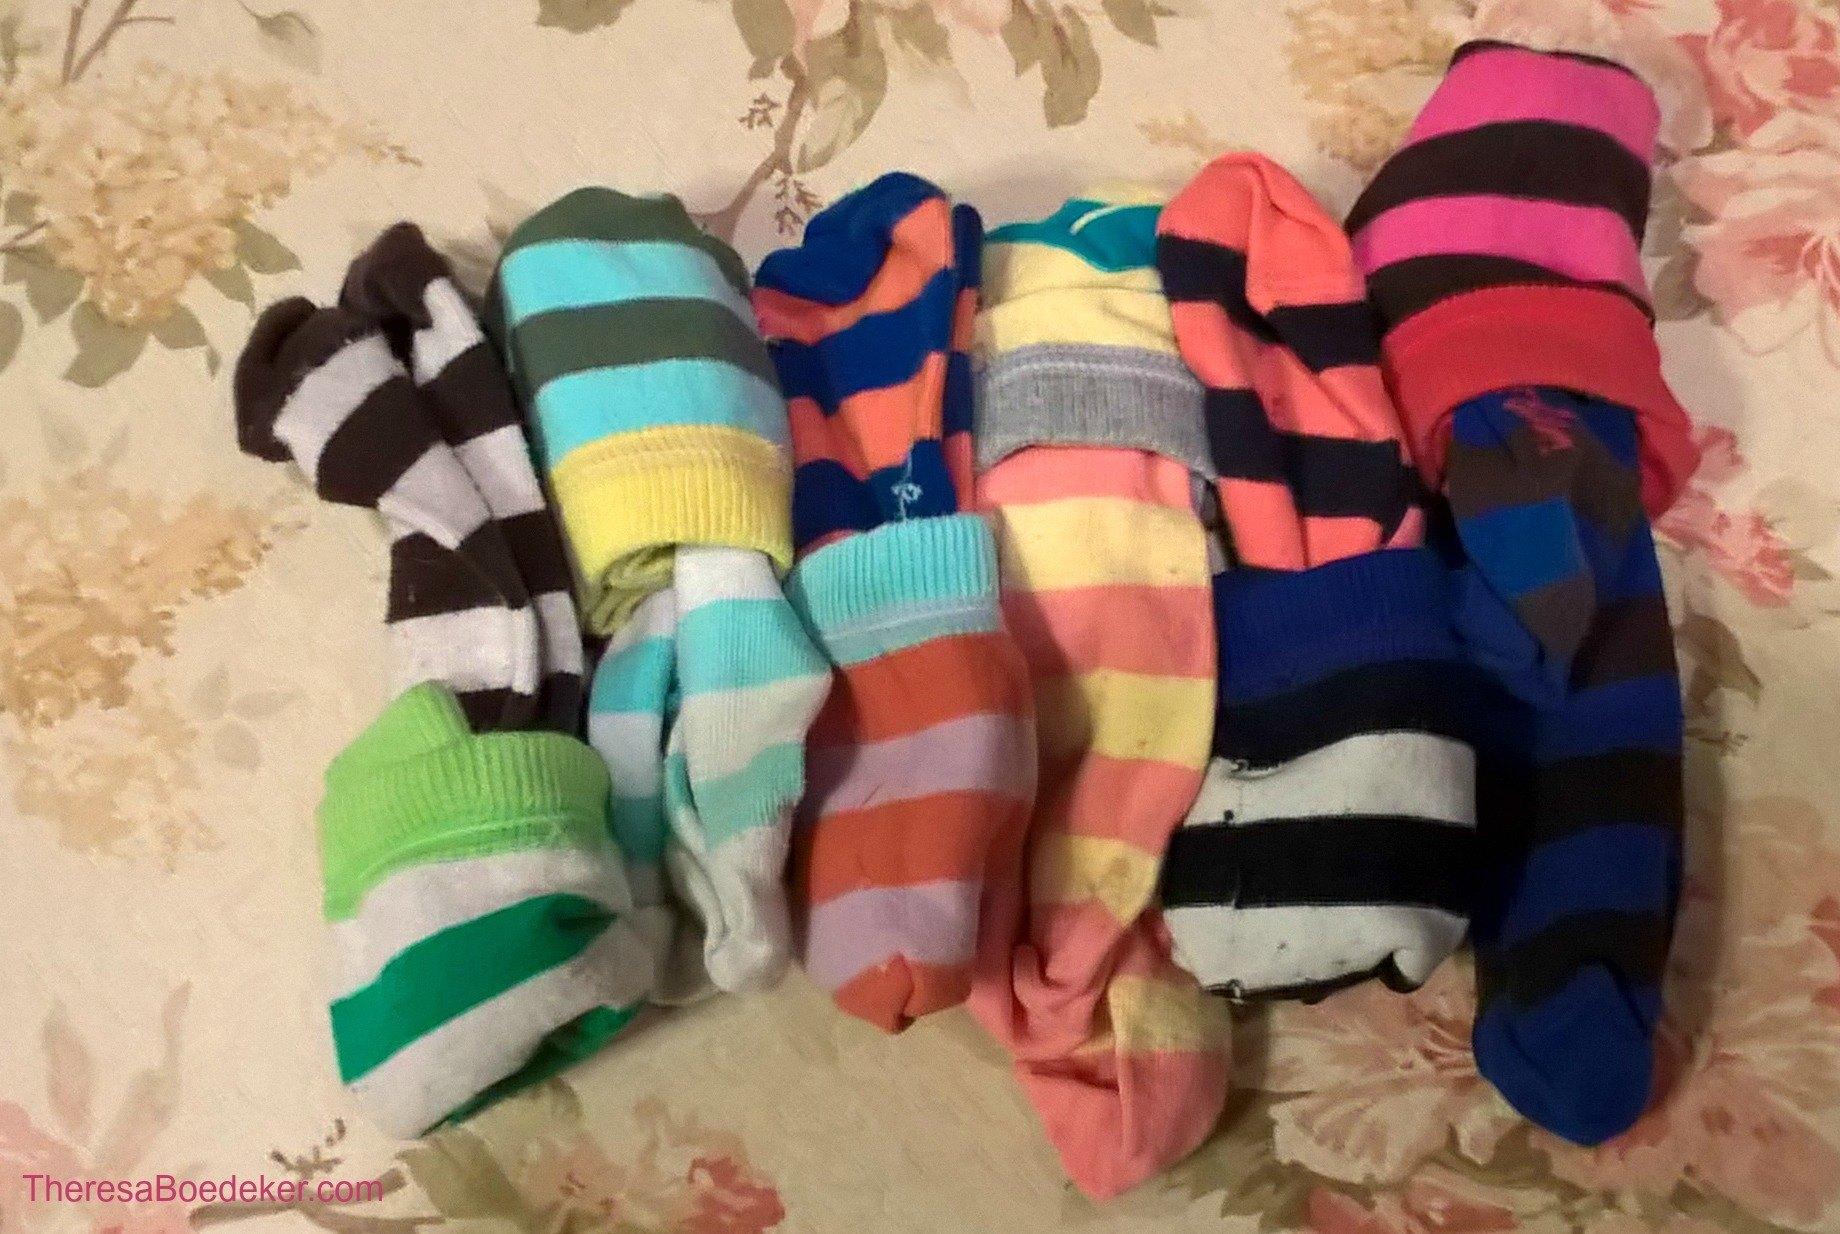 The possibilities for old or lone socks are endless. No longer will you ask, what to do with old socks. Reuse and recycle those unused socks into new ideas.